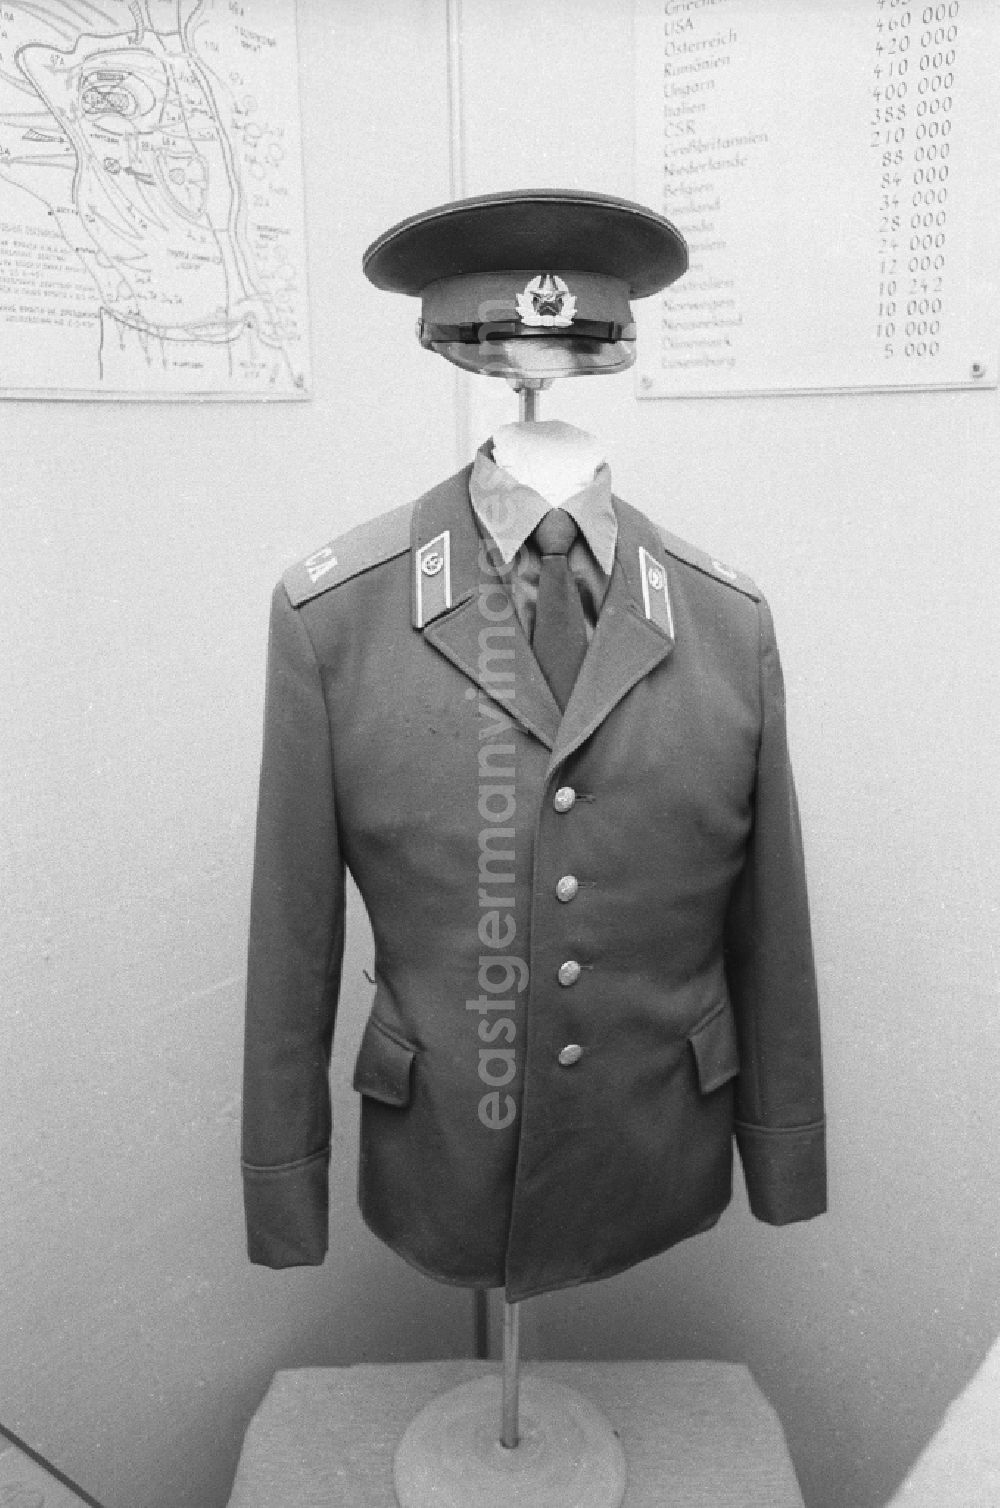 GDR picture archive: Berlin - Opening of the history cabinet of today's House of Liberation in Leninallee, today's Landsberger Allee 563 in the district Marzahn in Berlin, the former capital of the GDR, German Democratic Republic. Soviet or russian uniform of a soldier in the exhibition